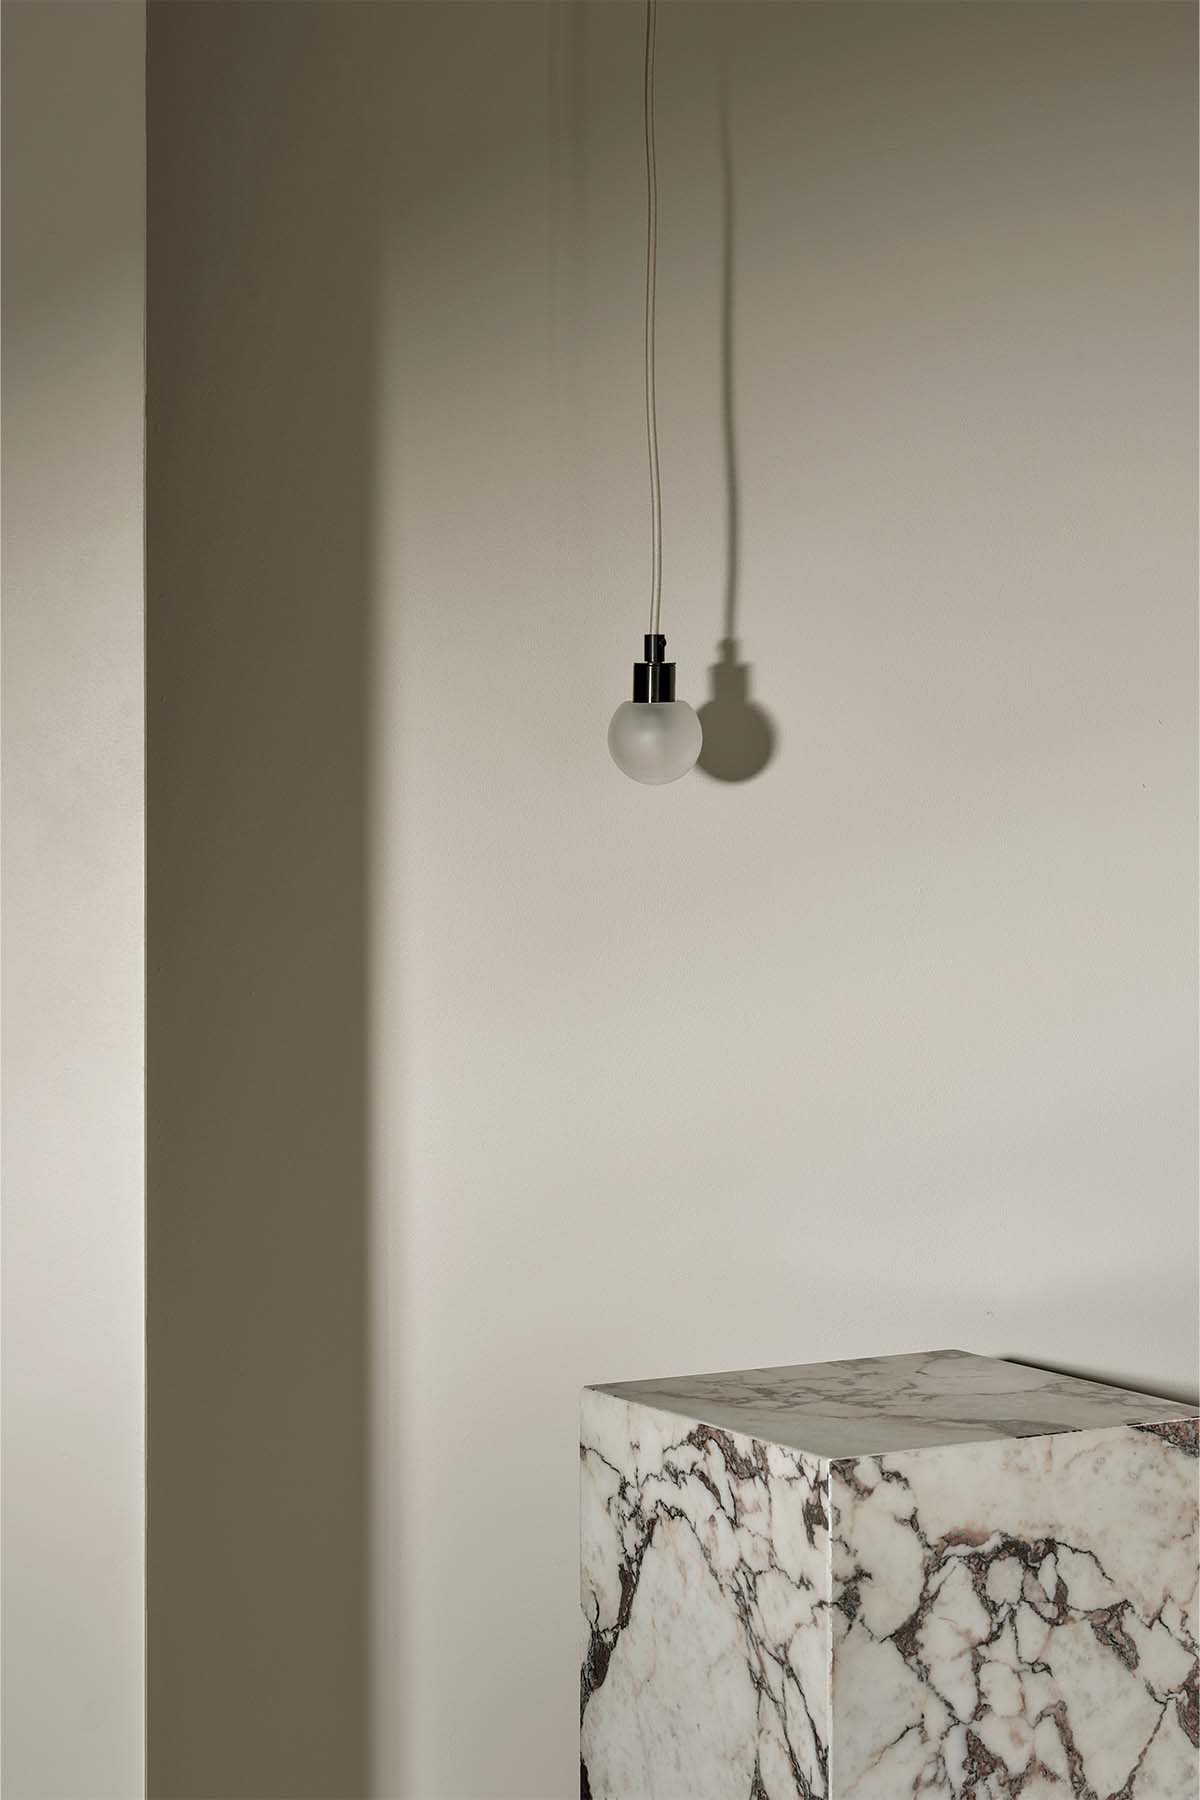 Orb Pendant, Mini in Brushed Black and Clear Frosted. Image by Lawrence Furzey